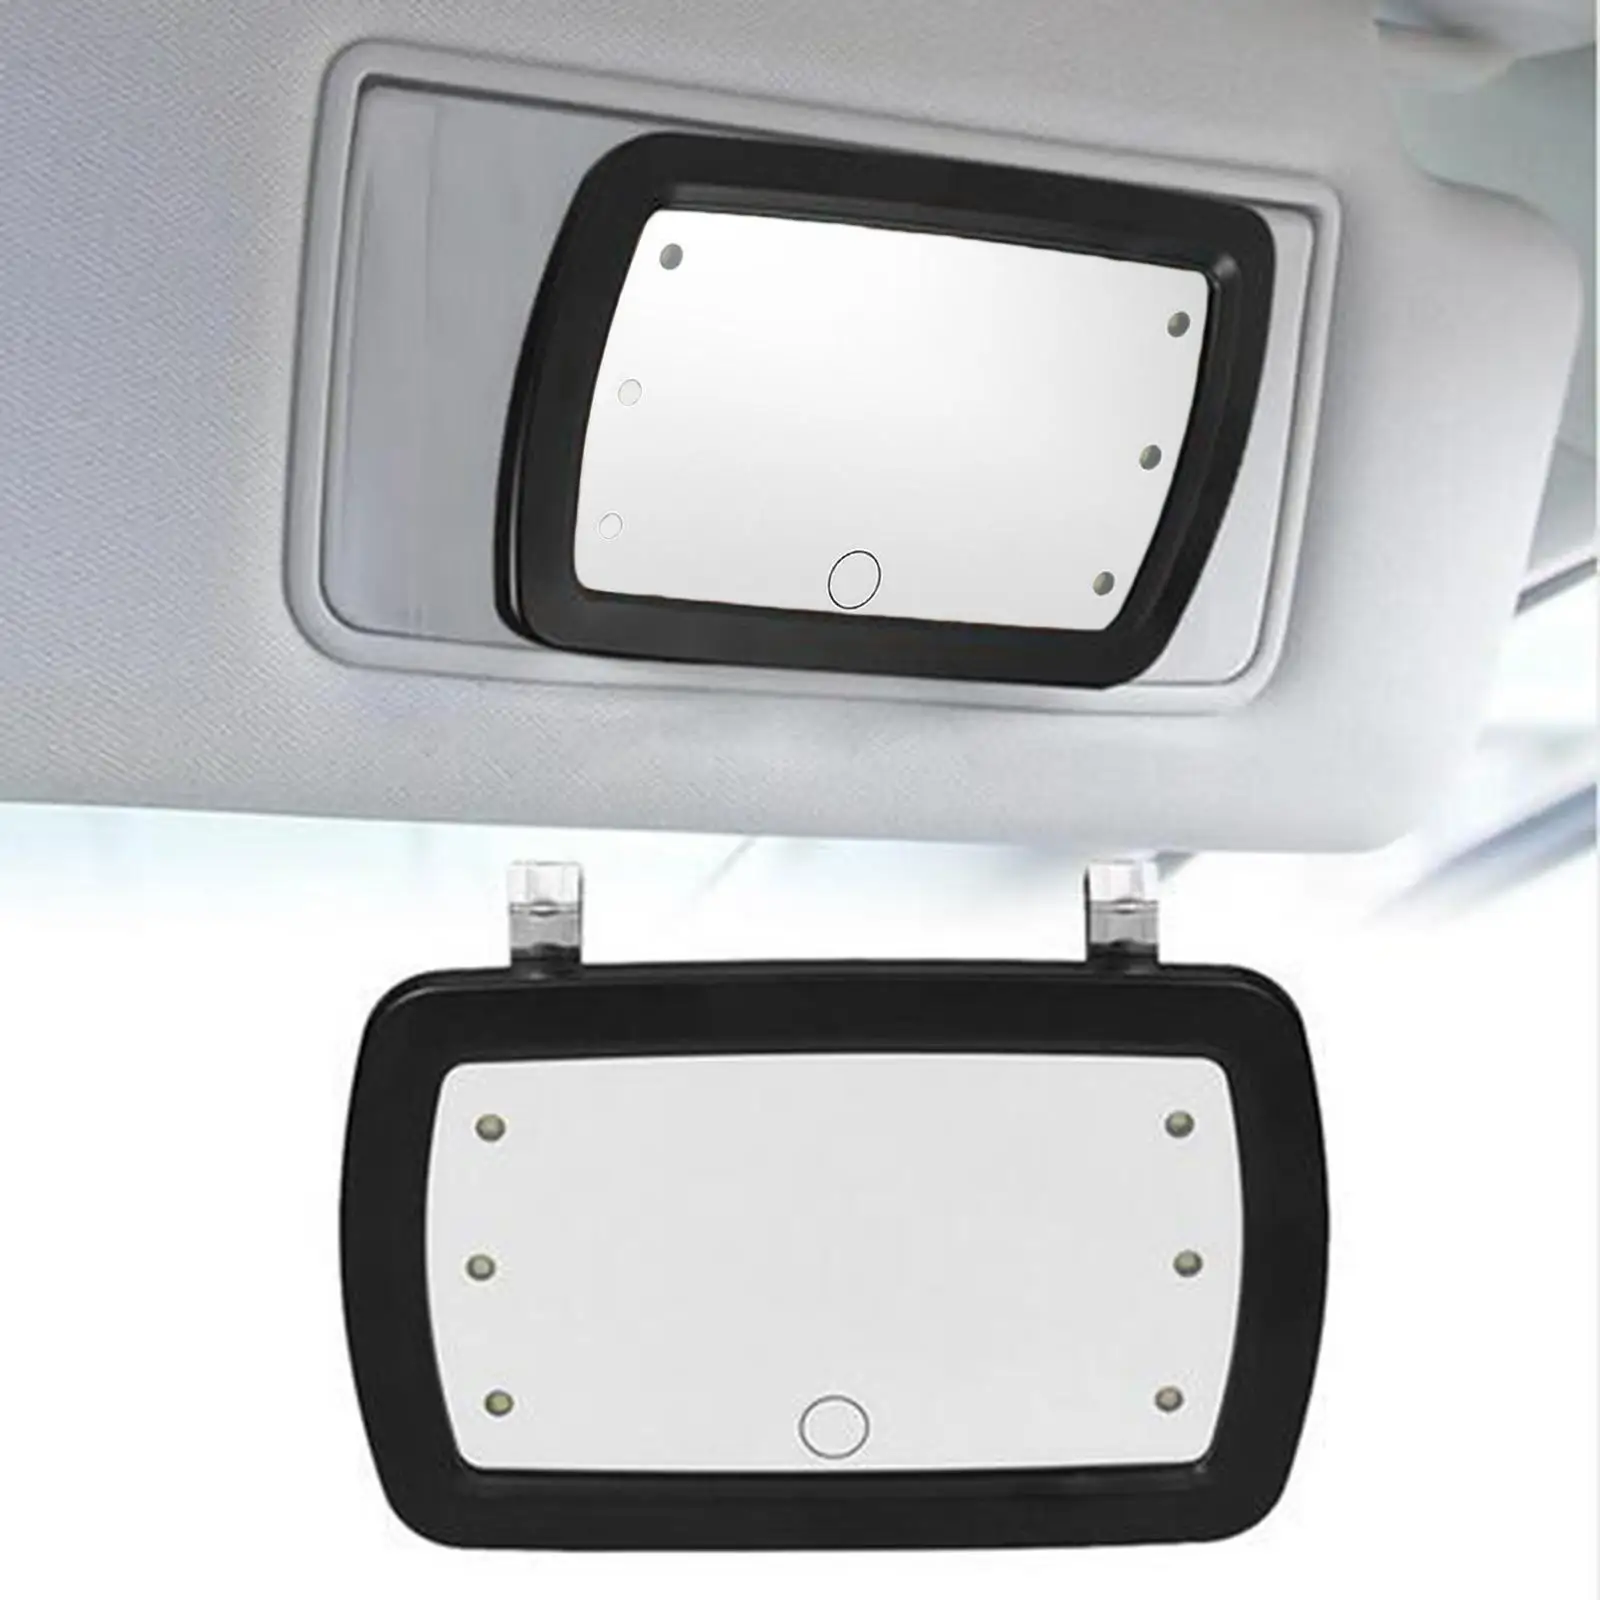  Visor Mirror  Interior Mirror with 6 LED Lights Makeup  for Automobile Vacation Long 